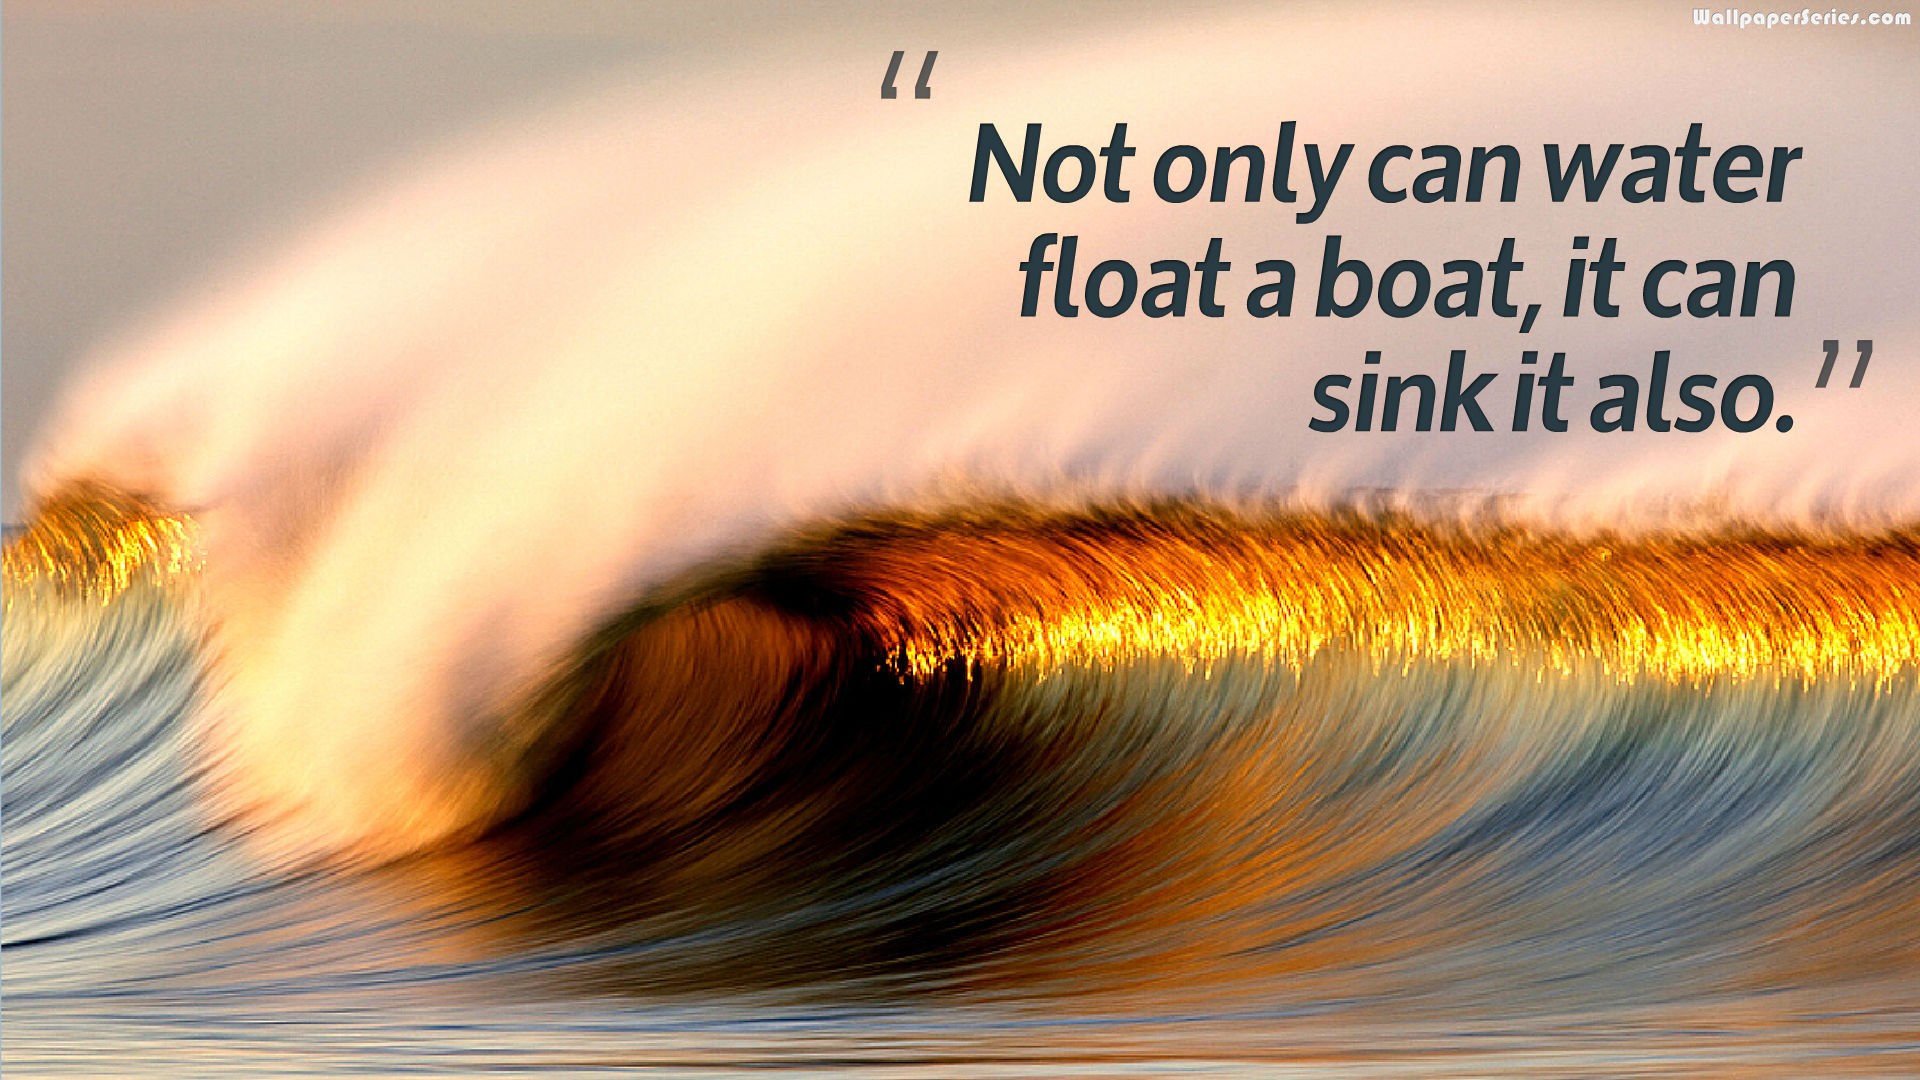 Nature Quotes Wallpaper - Cool Pictures Of Waves - HD Wallpaper 